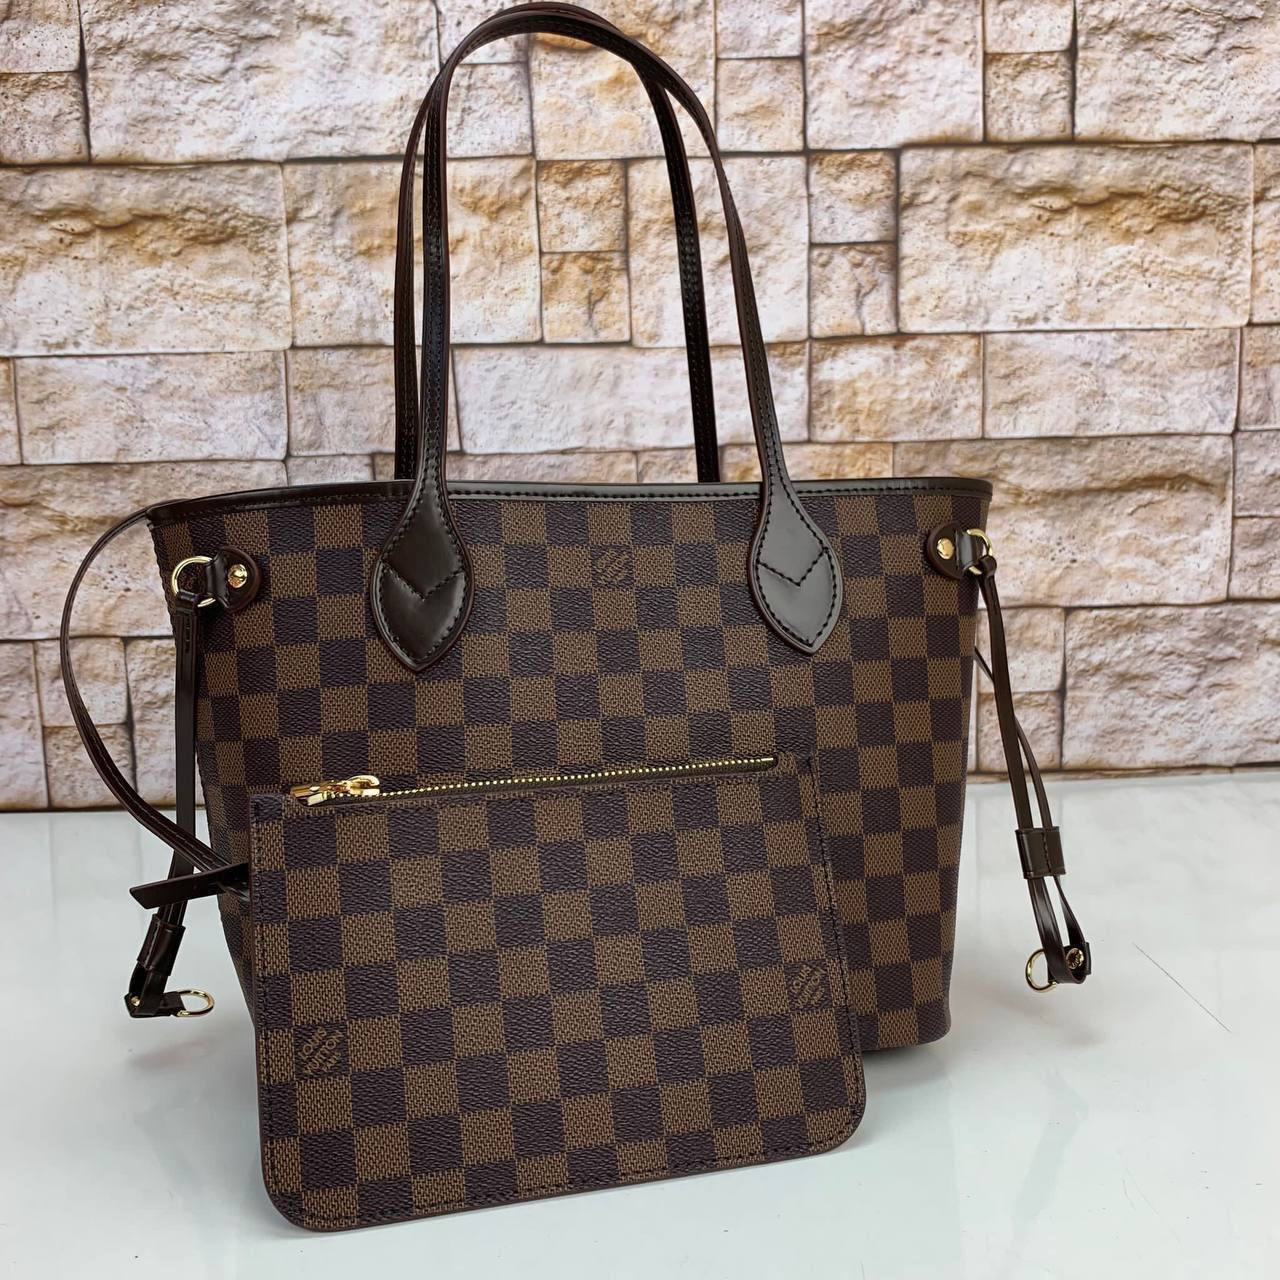 Louis Vuitton Neverfull PM genuine leather women's bag